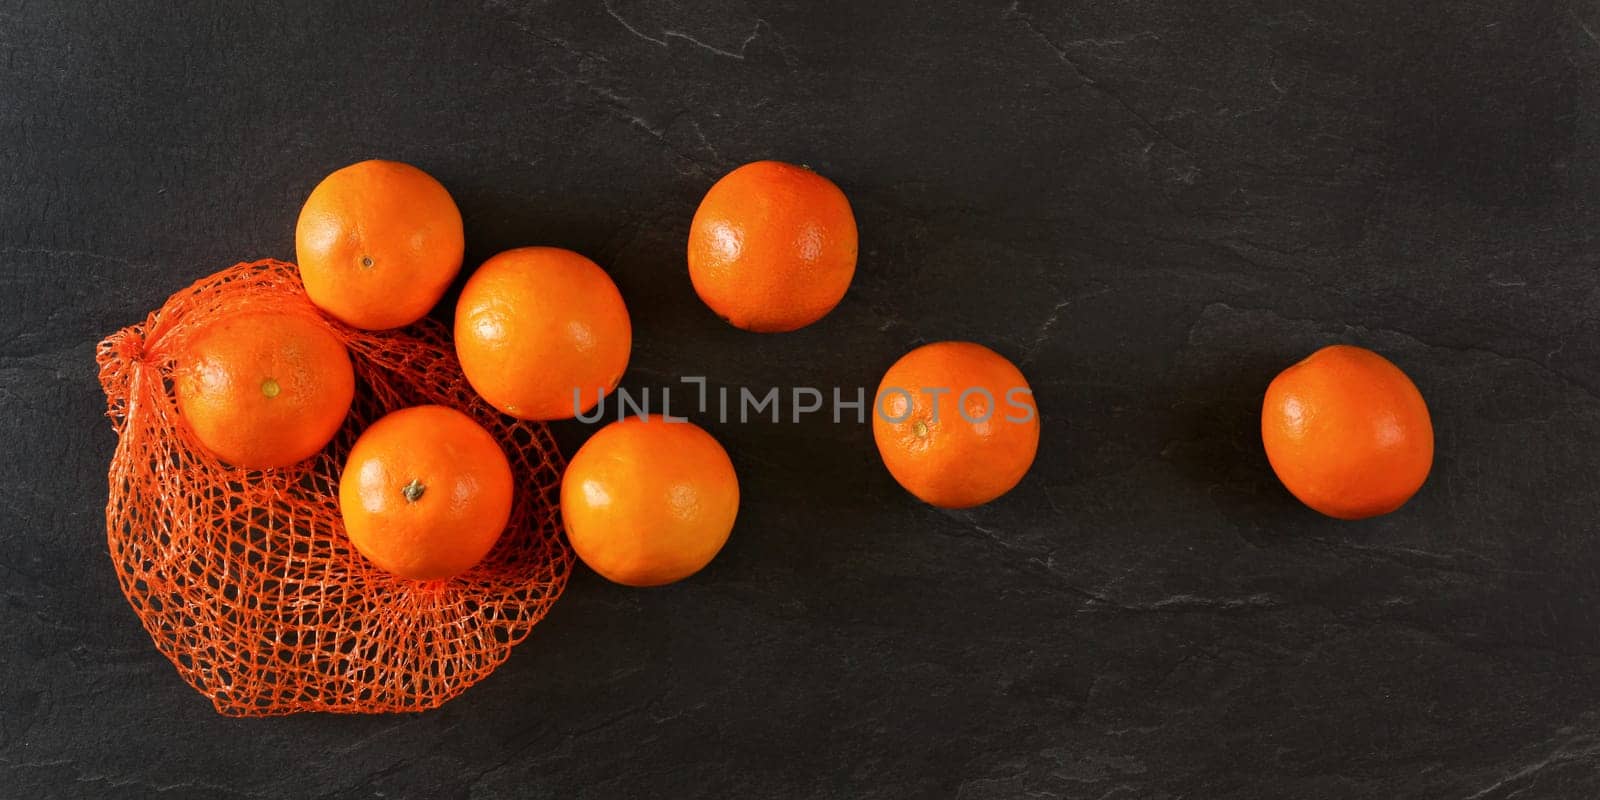 Top down view - oranges in net, some scattered on black stone like board by Ivanko